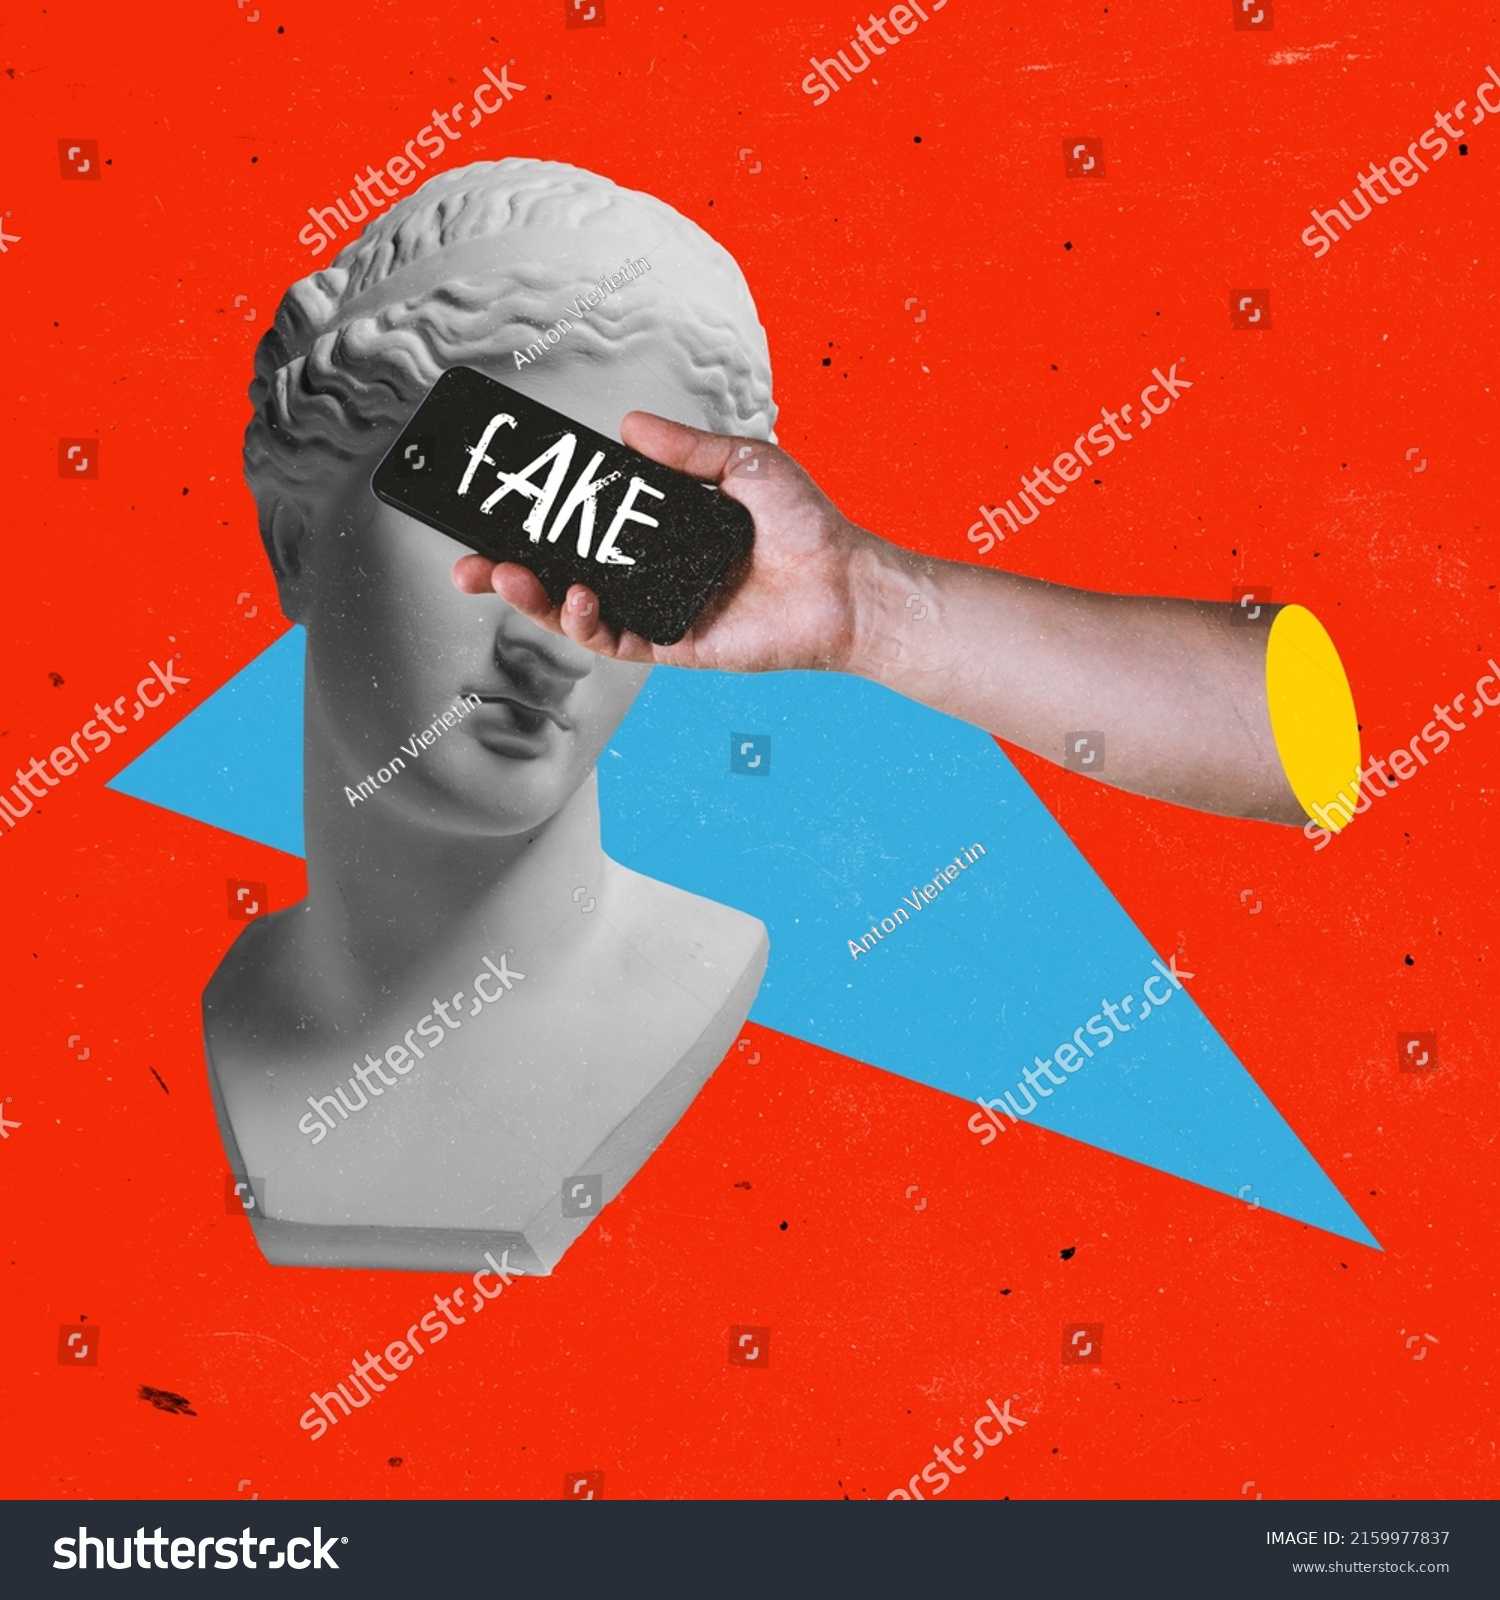 Contemporary art collage. Antique statue bust and phone screen covering eyes with fake news lettering. Spreading rumors. Concept of disinformation, gossips, propaganda, influence, society. Artwork #2159977837